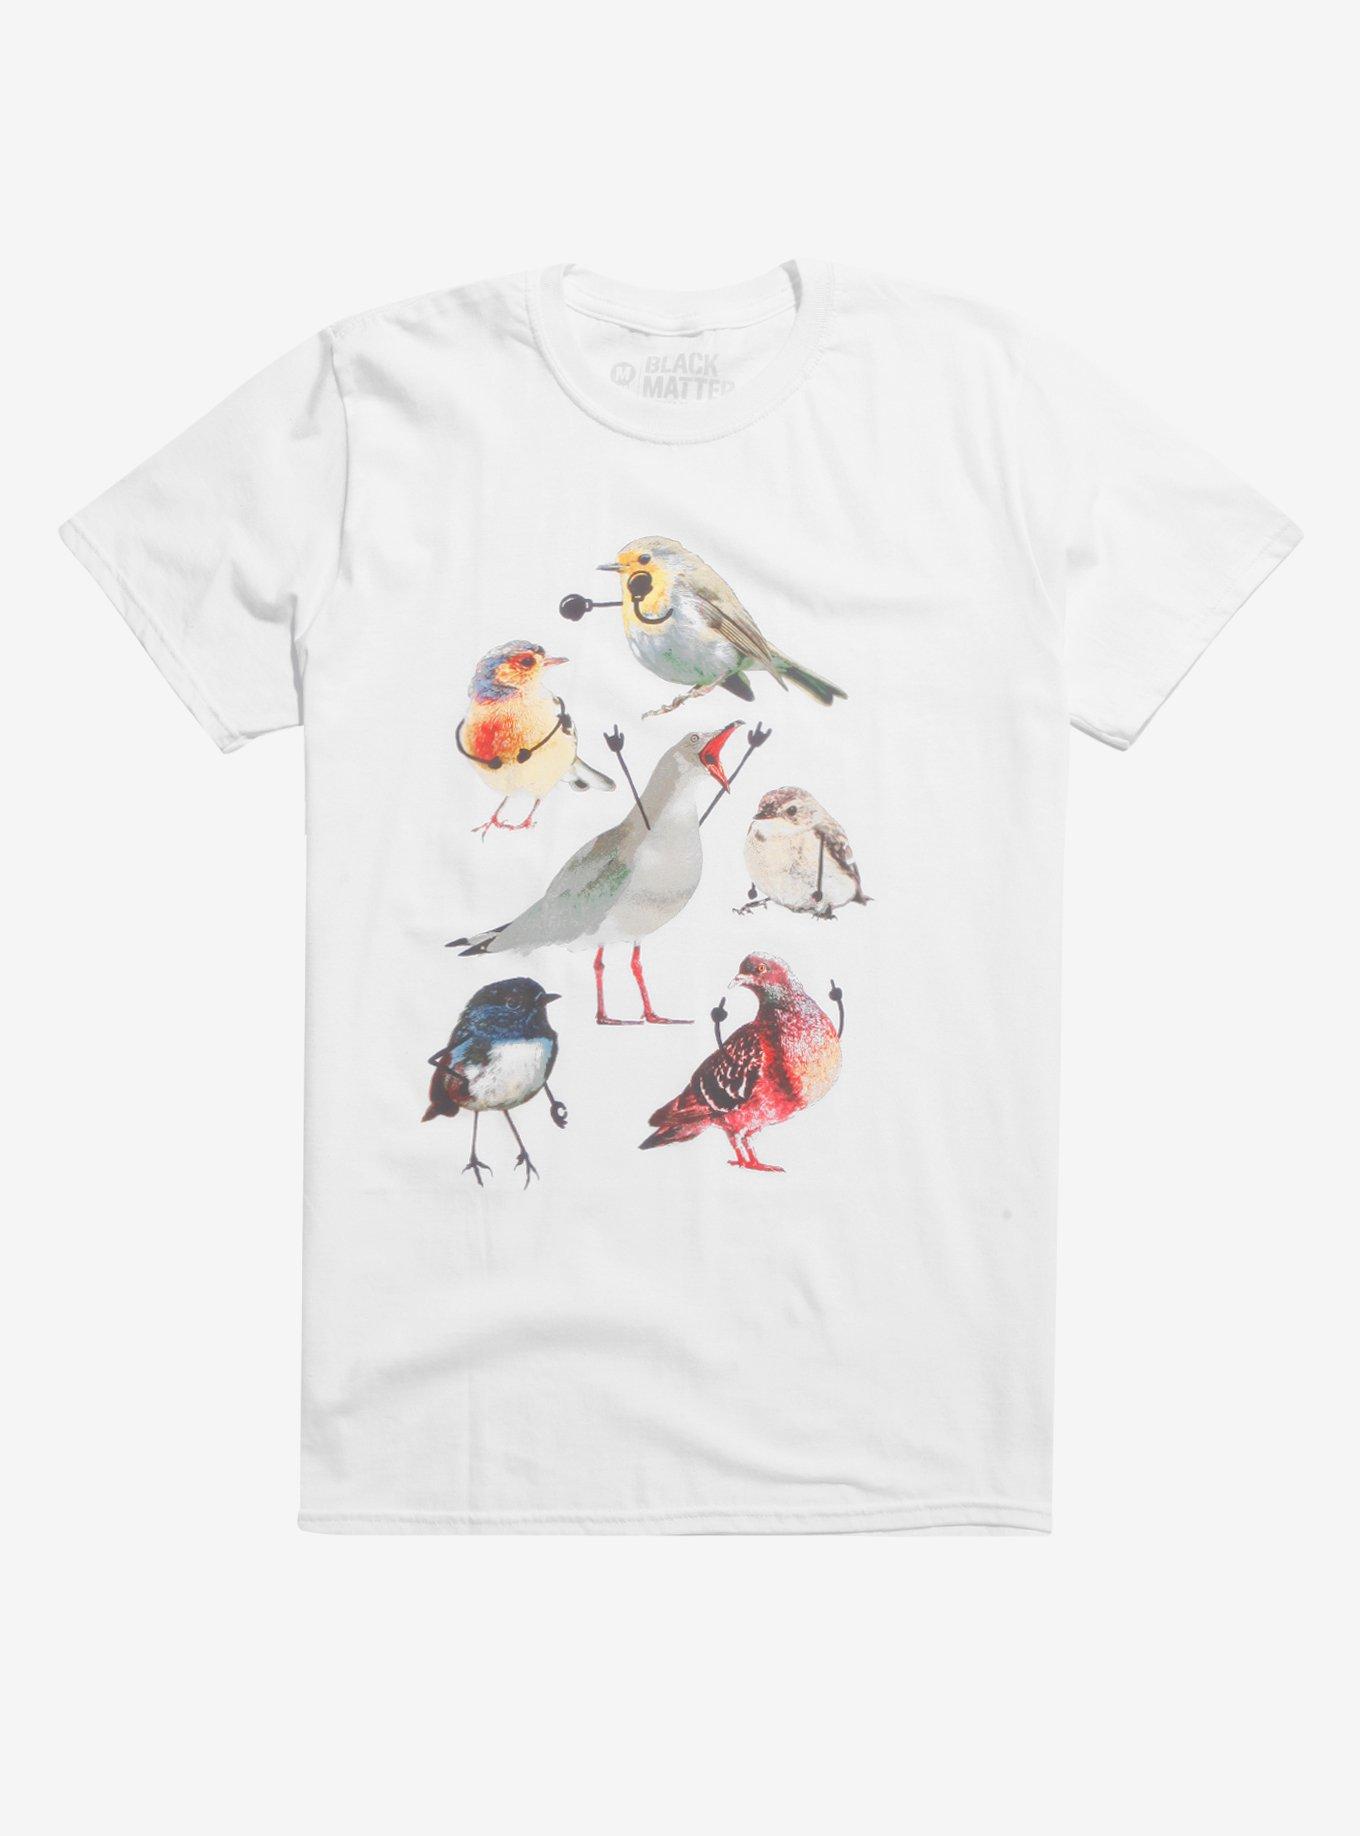 Birds With Arms T-Shirt, MULTI, hi-res